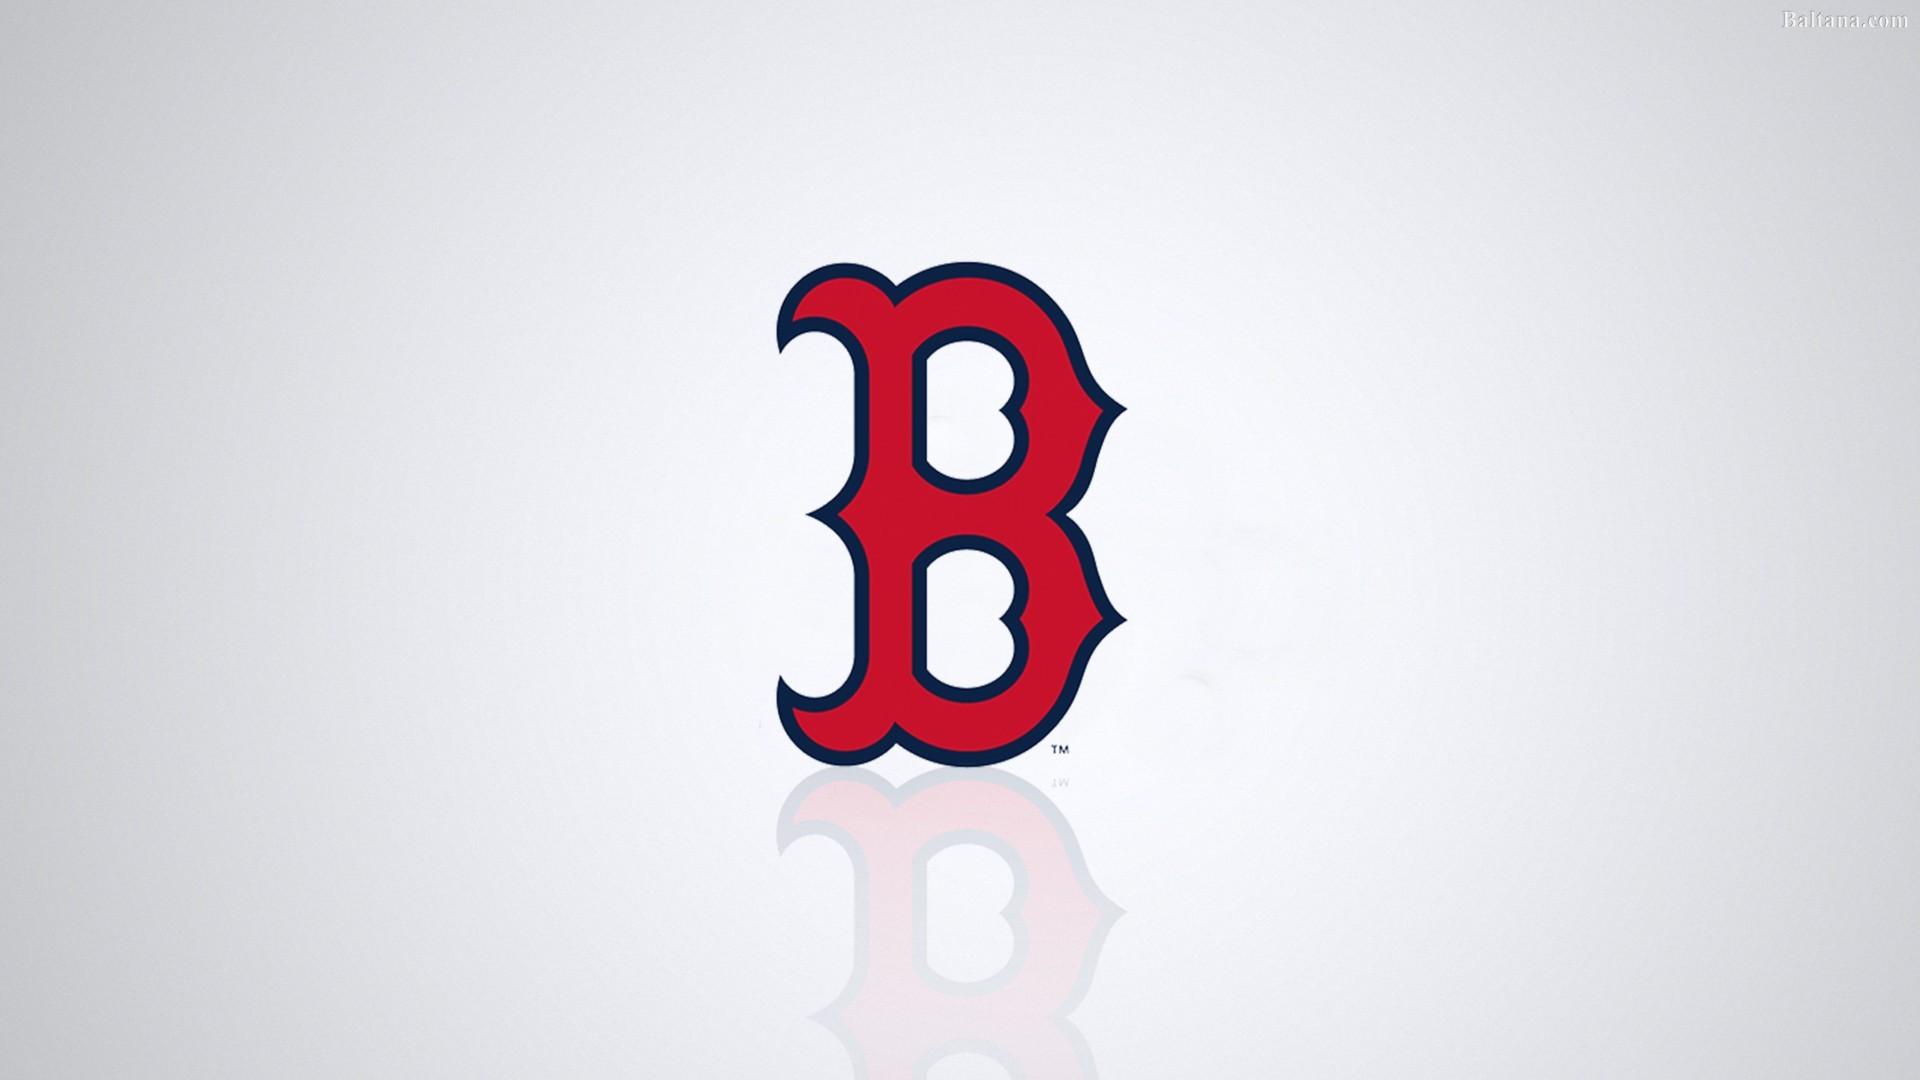 Boston Red Sox Background Wallpaper 33002